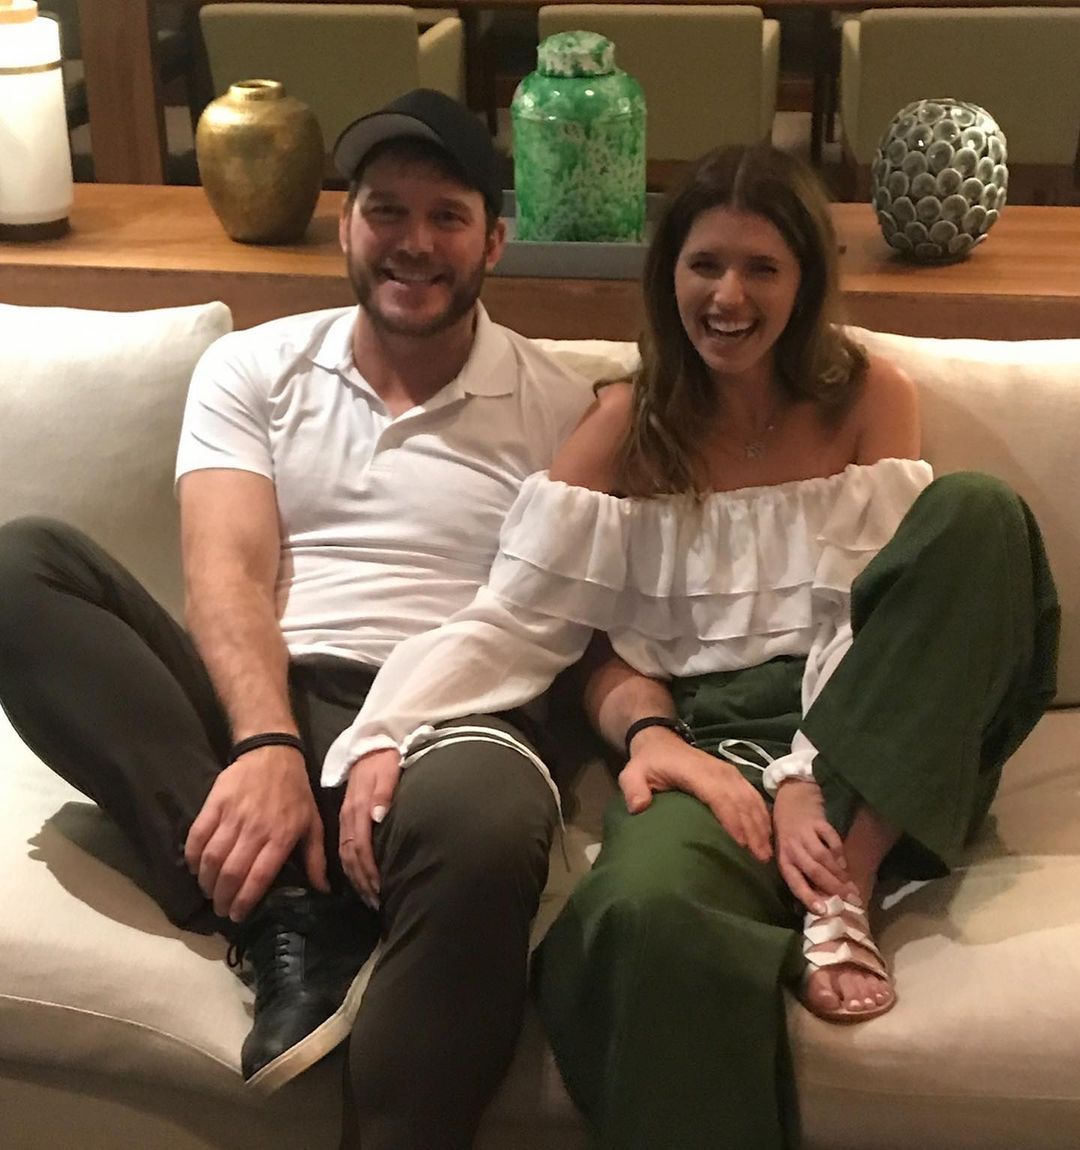 Chris Pratt and Katherine Schwarzenegger hanging on a couch